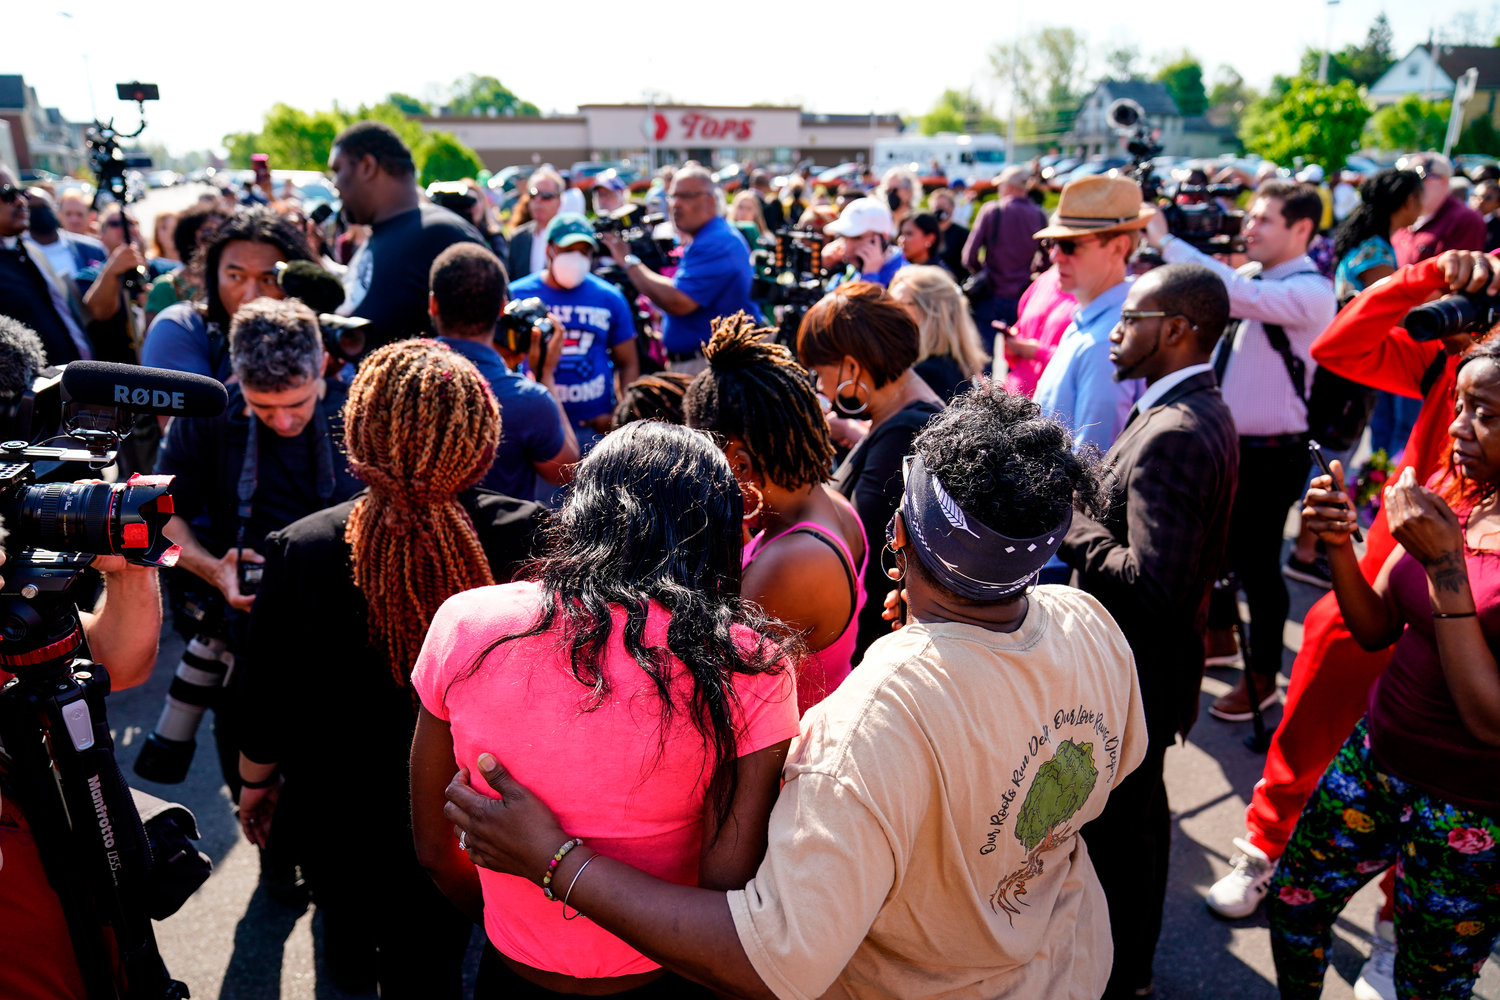 People gather outside the scene of a shooting at a supermarket, in Buffalo, N.Y. The NAACP, the nation’s oldest civil rights organization, said it will propose a sweeping plan meant to protect Black Americans from white supremacist violence, in response to a hate-fueled massacre that killed 10 Black people in Buffalo.